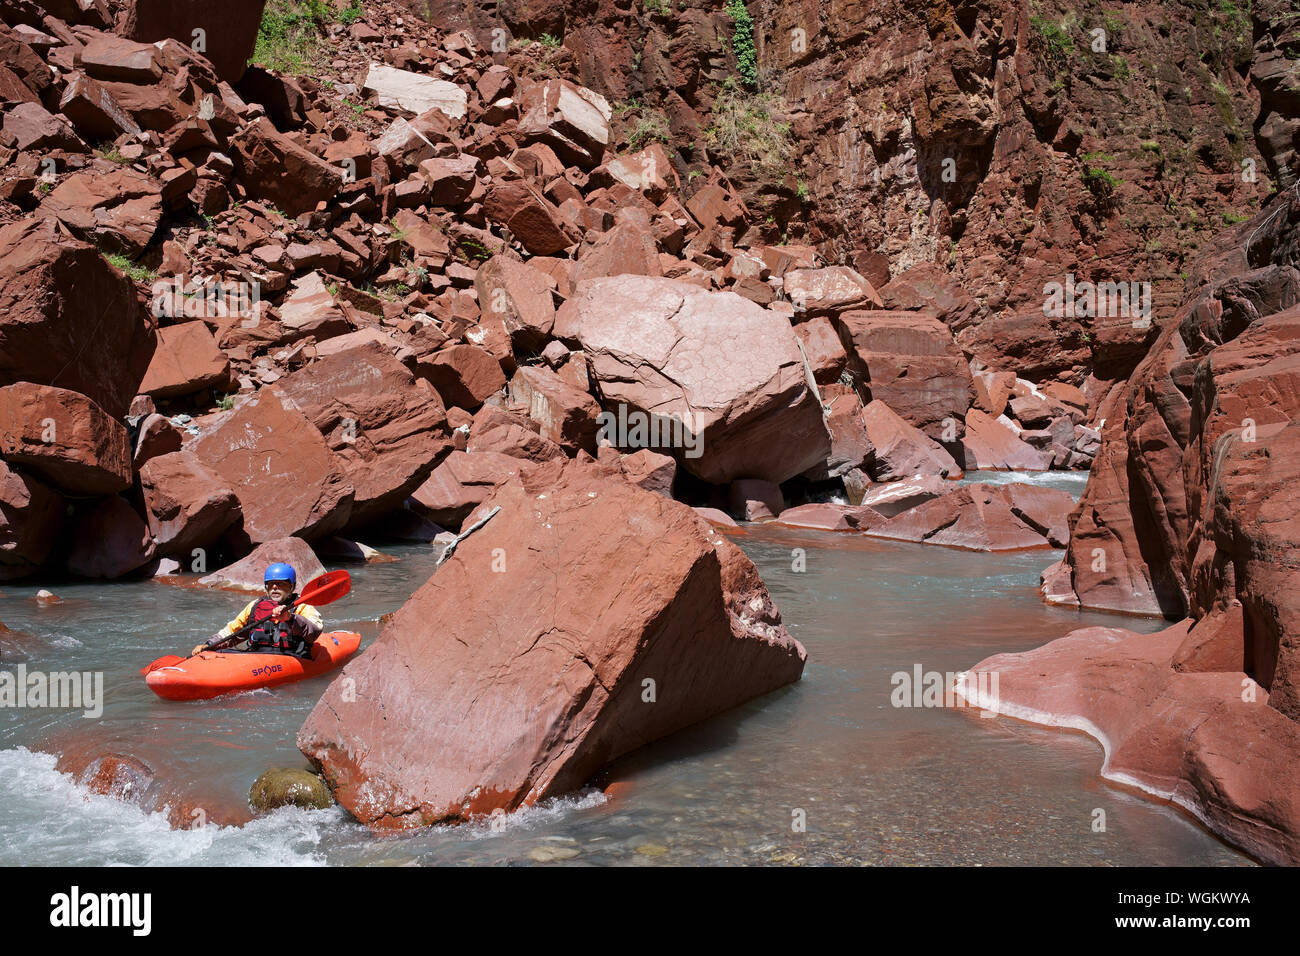 Middle-aged man kayaking between large red boulders on the Var River. Guillaumes, Daluis Gorge, Alpes-Maritimes, France. Stock Photo